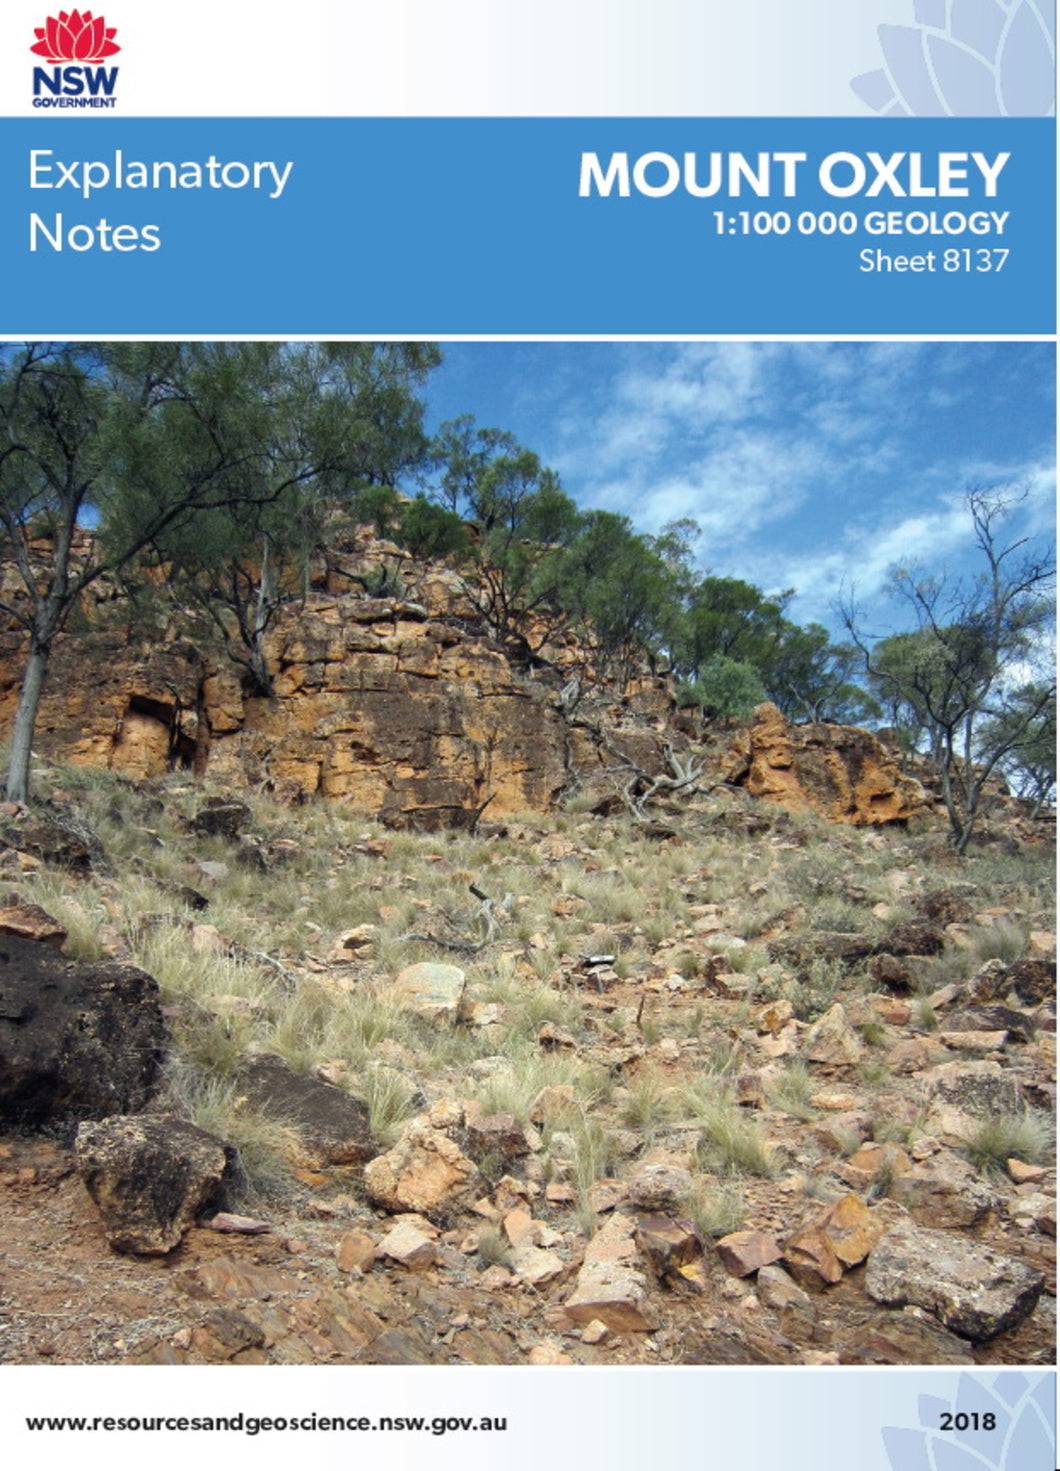 Image of Mount Oxley Explanatory Notes book cover